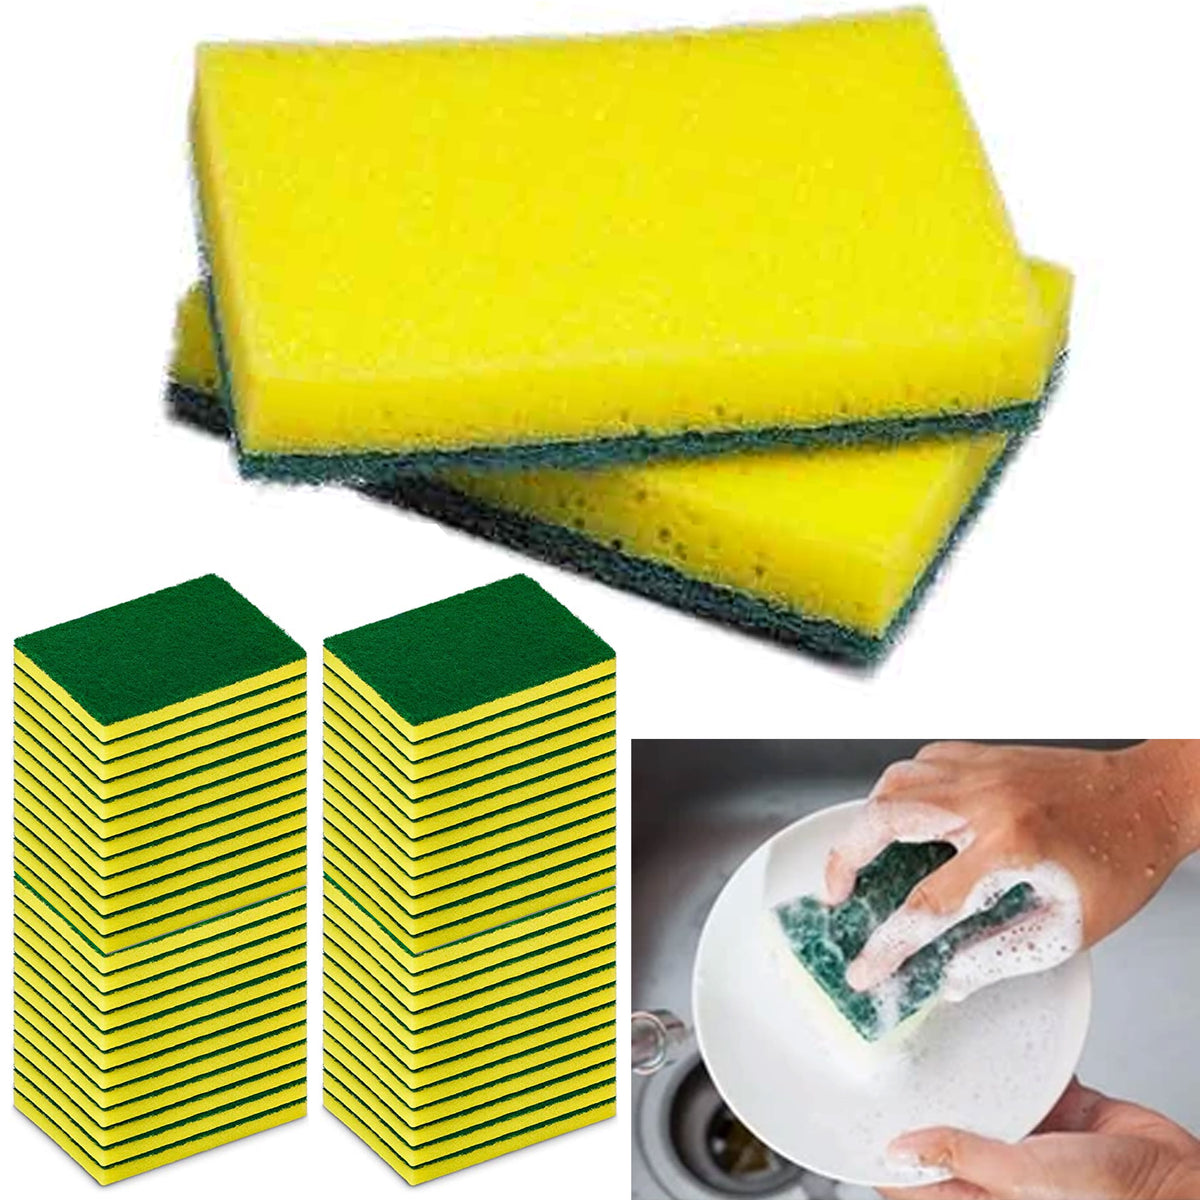 How to Clean a Dish Sponge the Absolute Right Way – Yaya Maria's